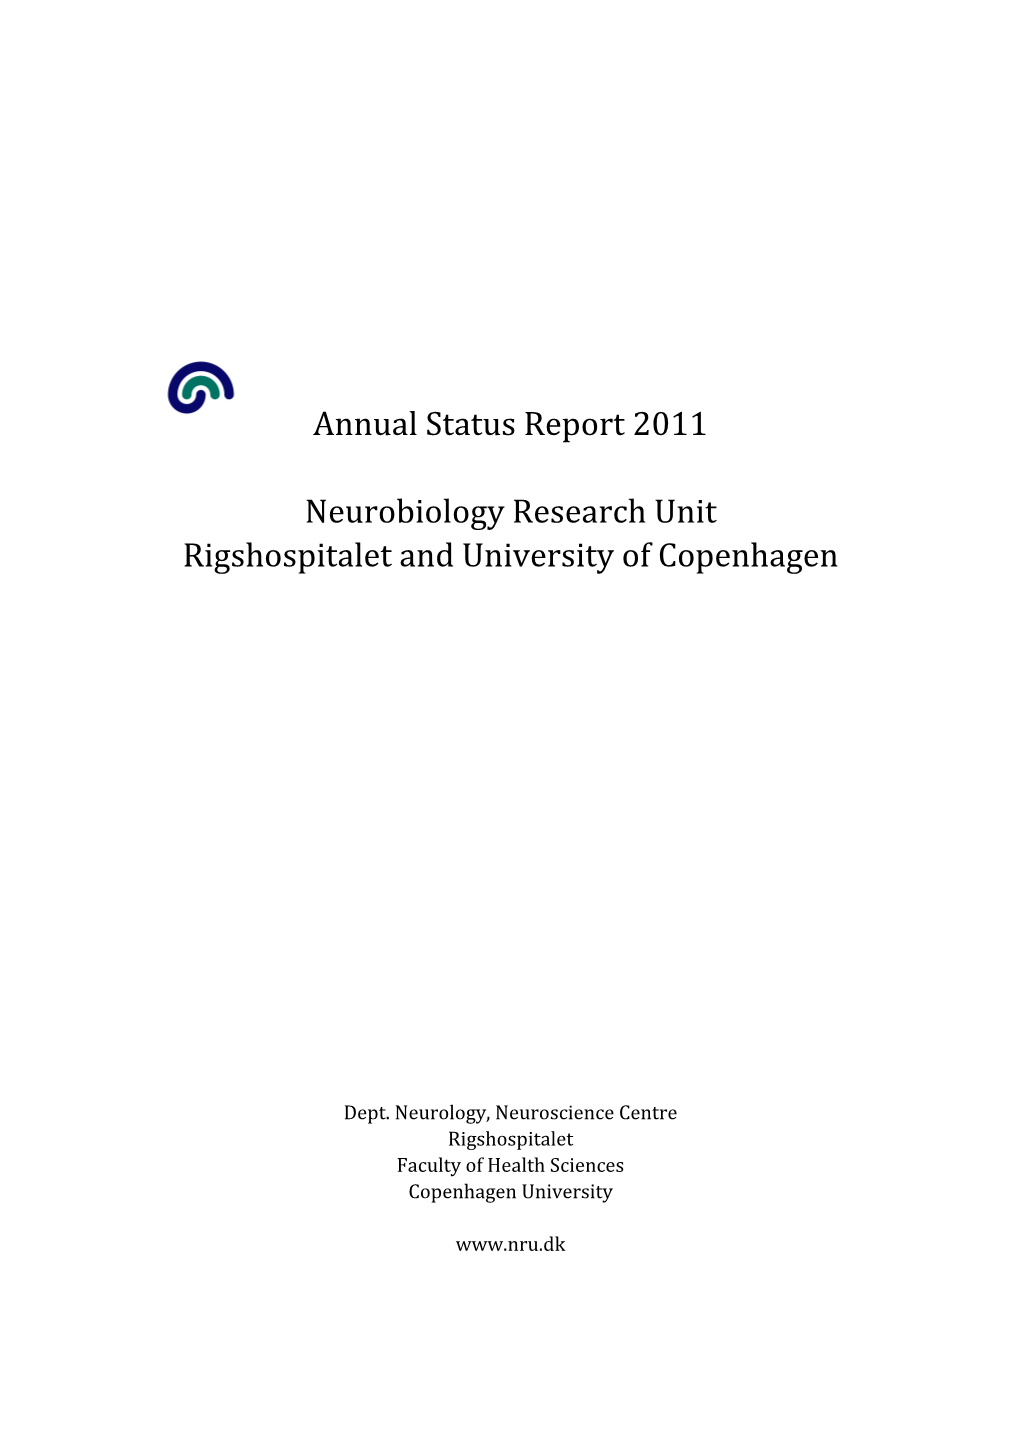 Annual Status Report 2011 Neurobiology Research Unit